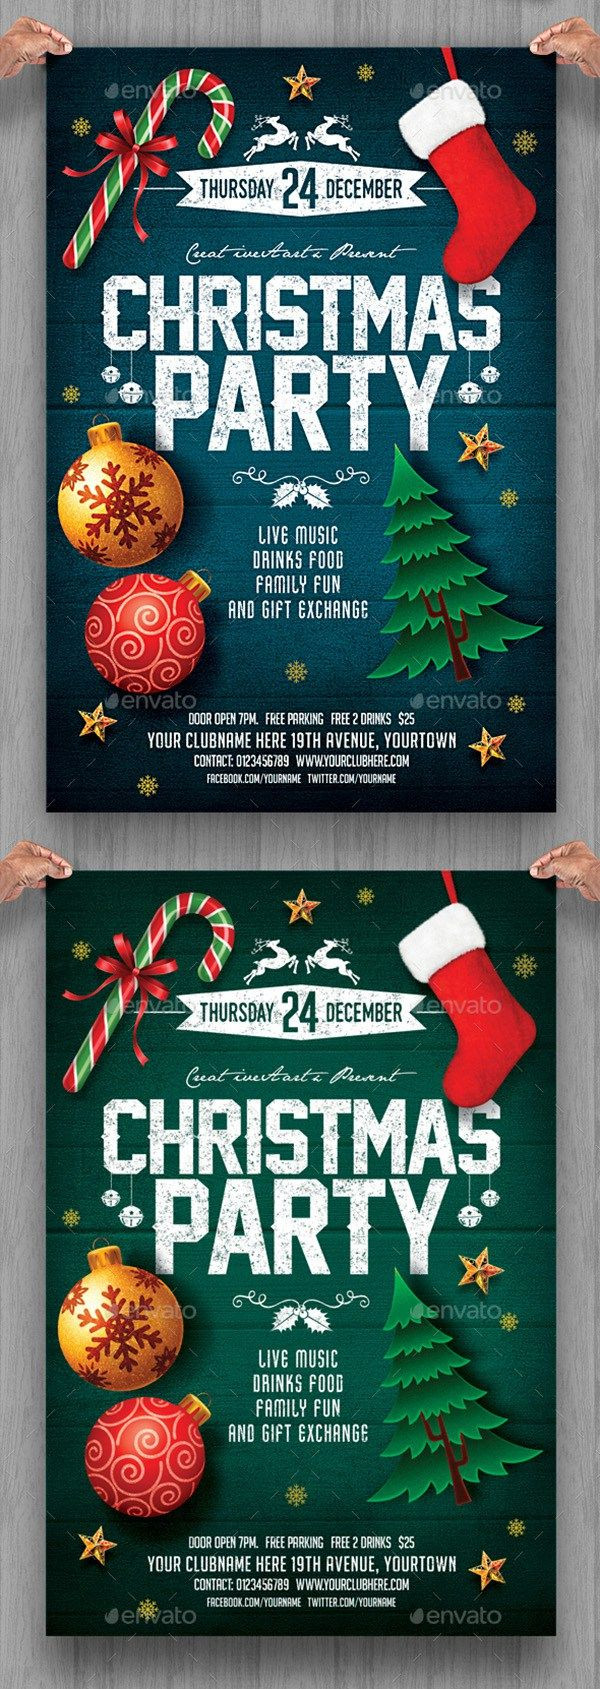 Christmas Party Posters Ideas
 Christmas Party Flyer Invitation flyers